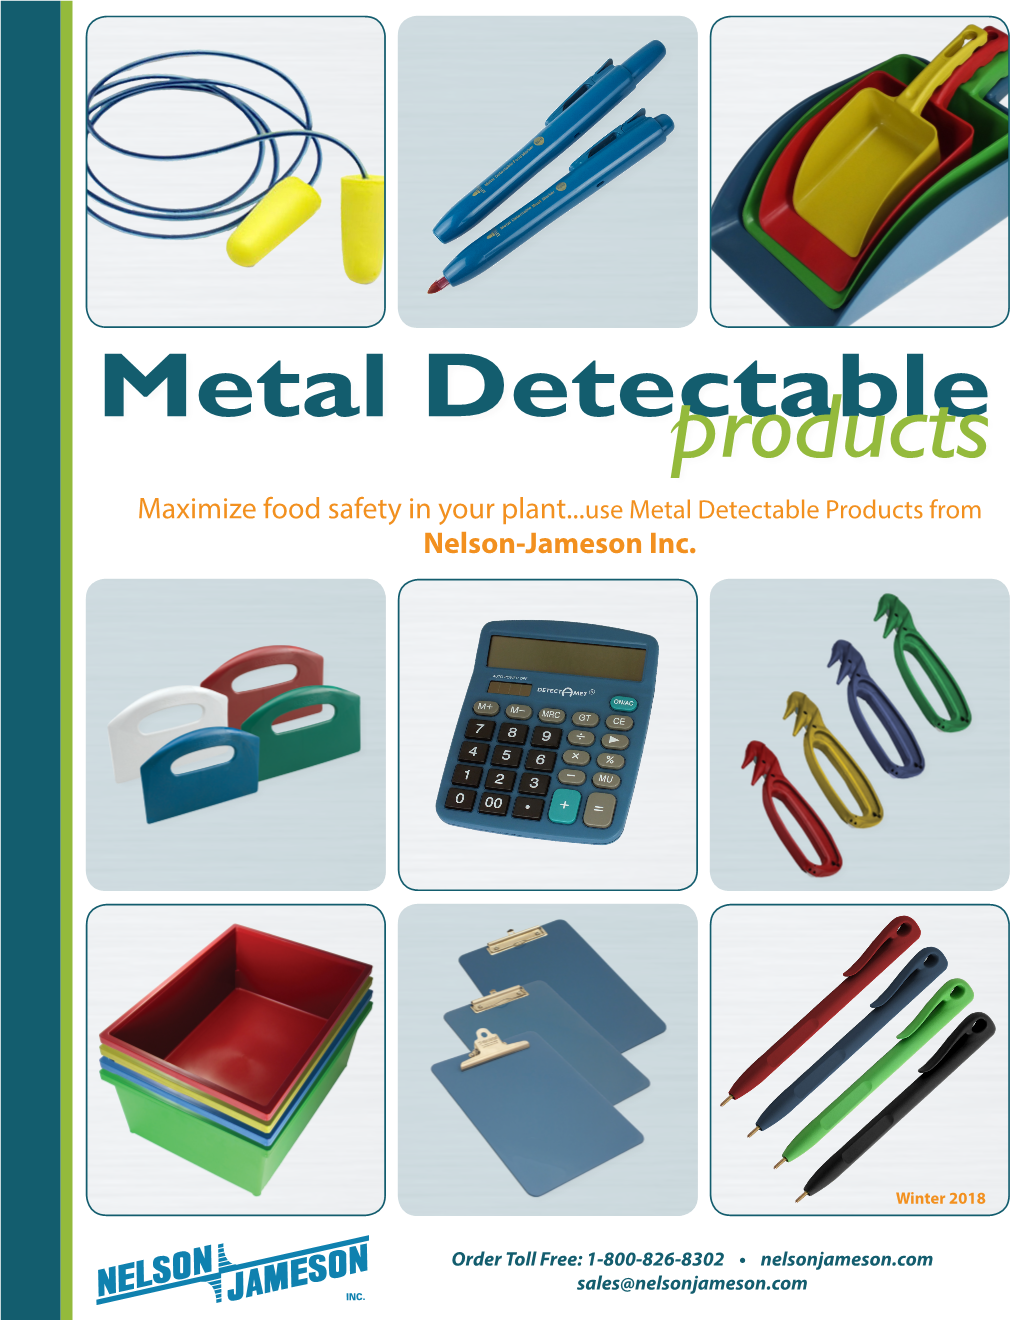 Metal Detectable Products from Nelson-Jameson Inc